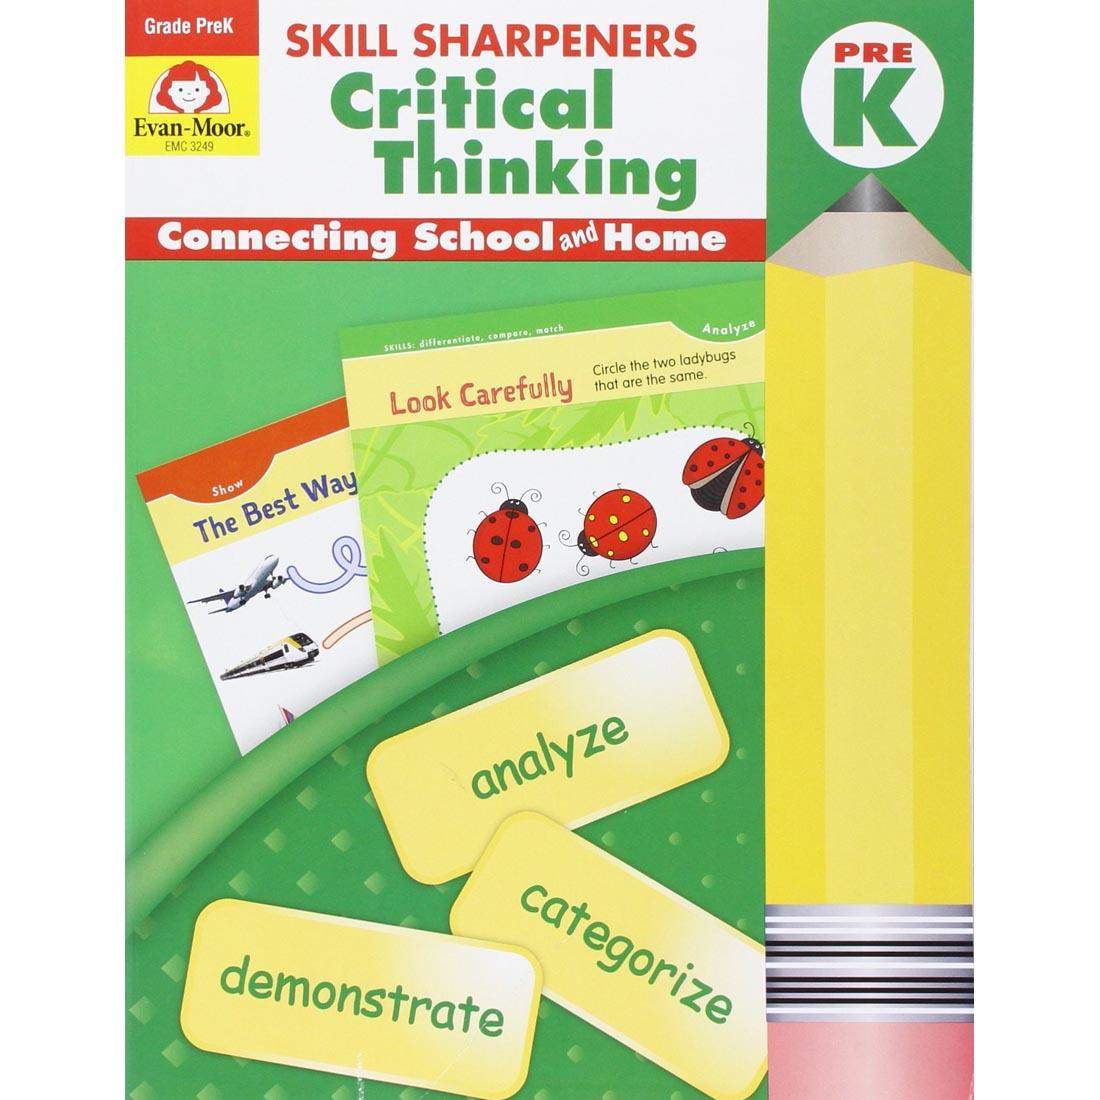 Skill Sharpeners Critical Thinking by Evan-Moor Pre-K